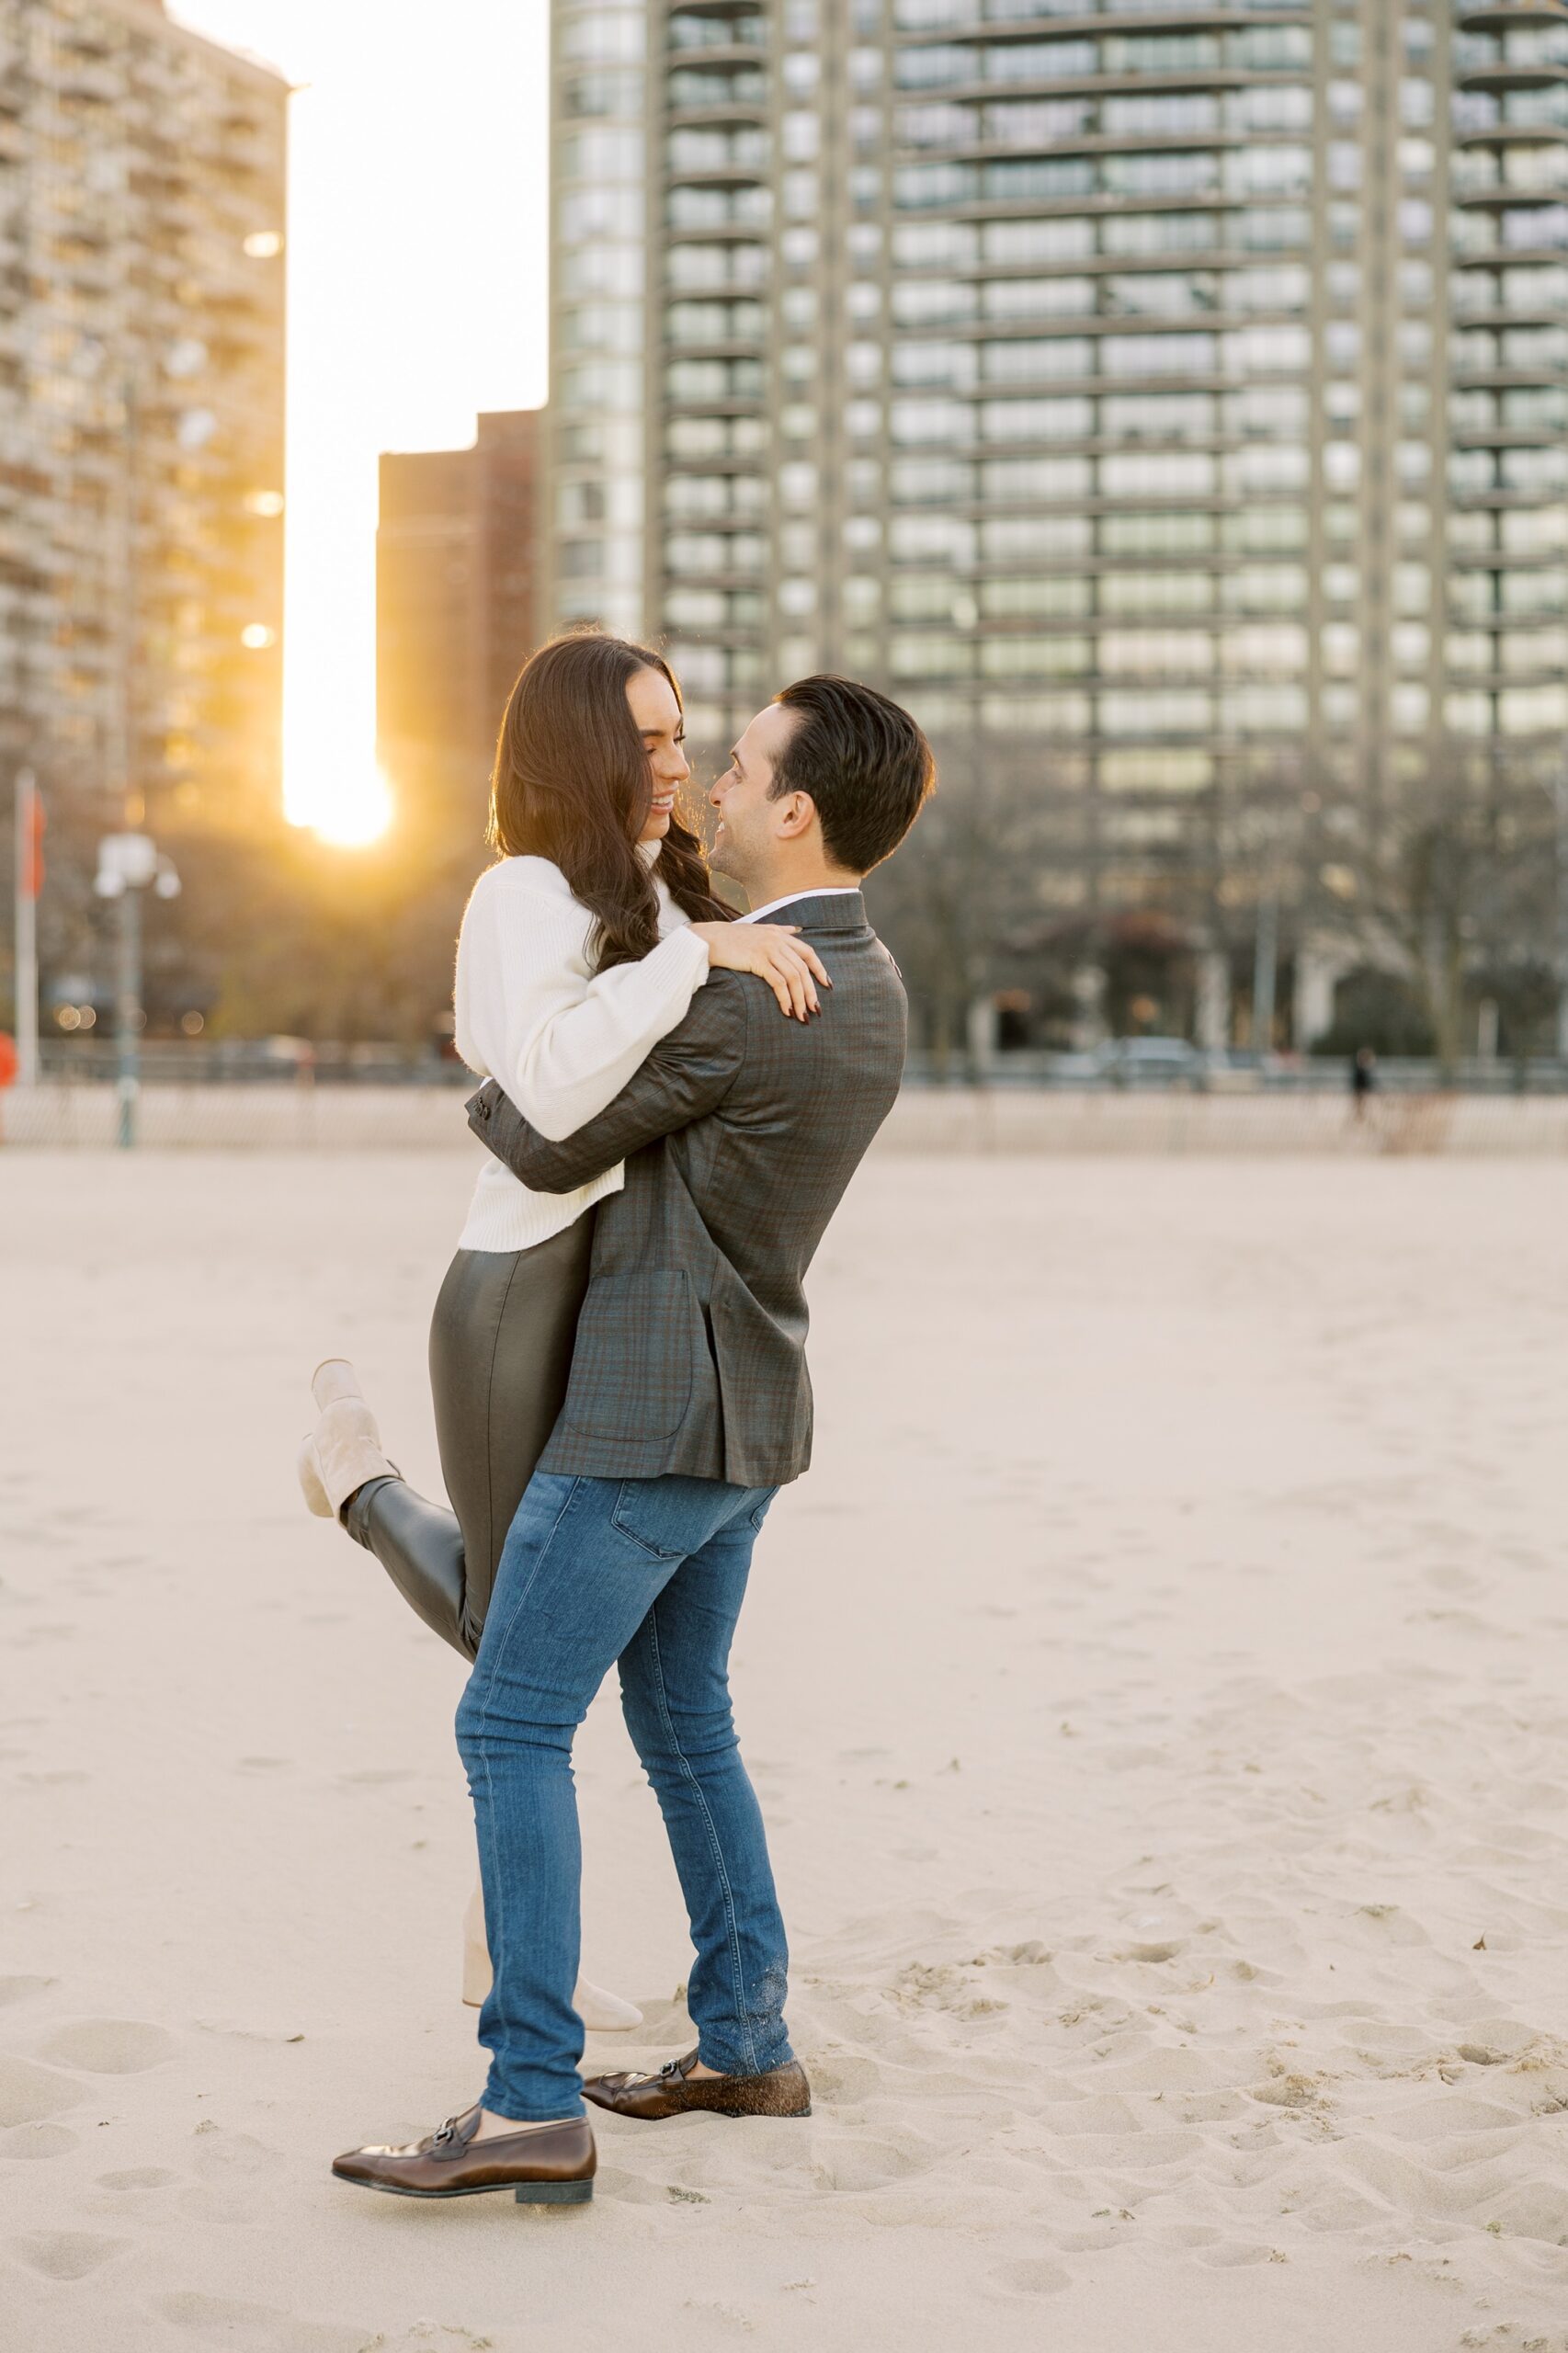 Man picks up woman and spins during downtown Chicago engagement photos